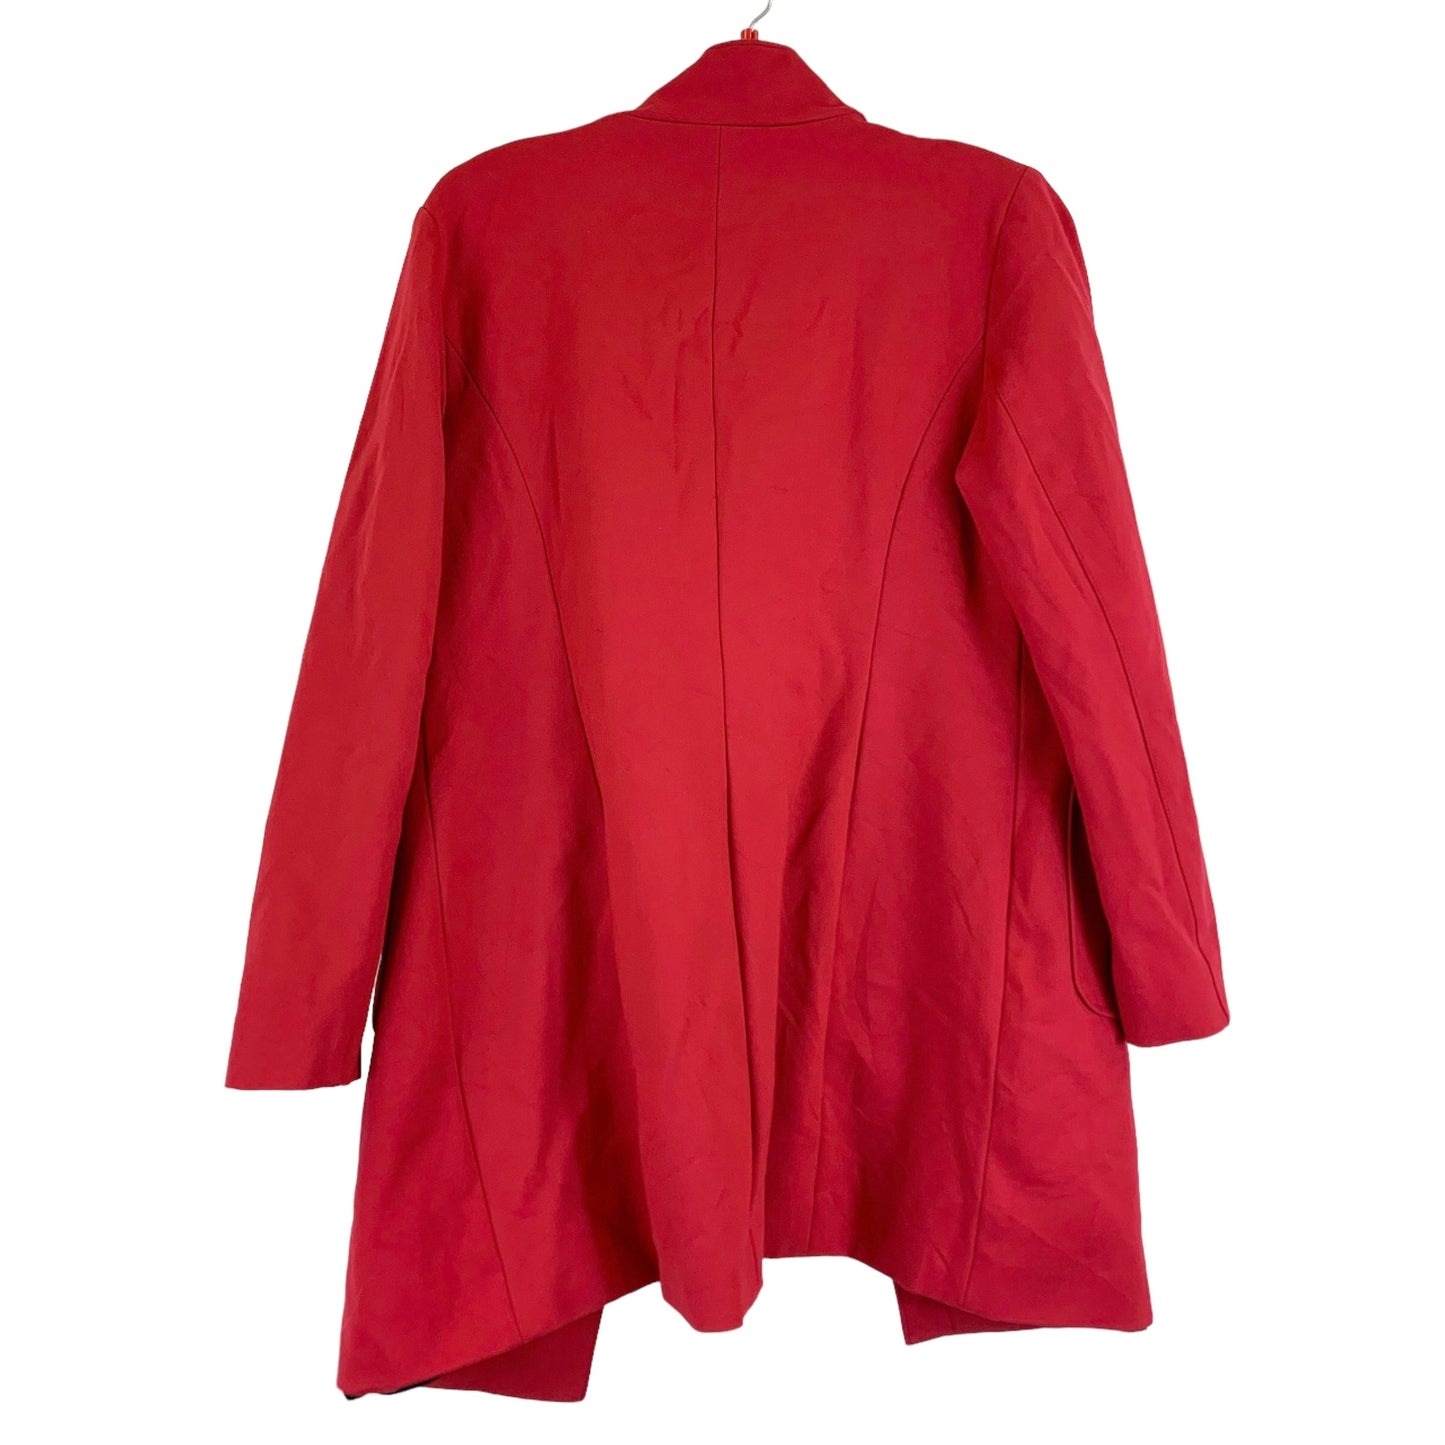 Red Jacket Shirt Chicos, Size M